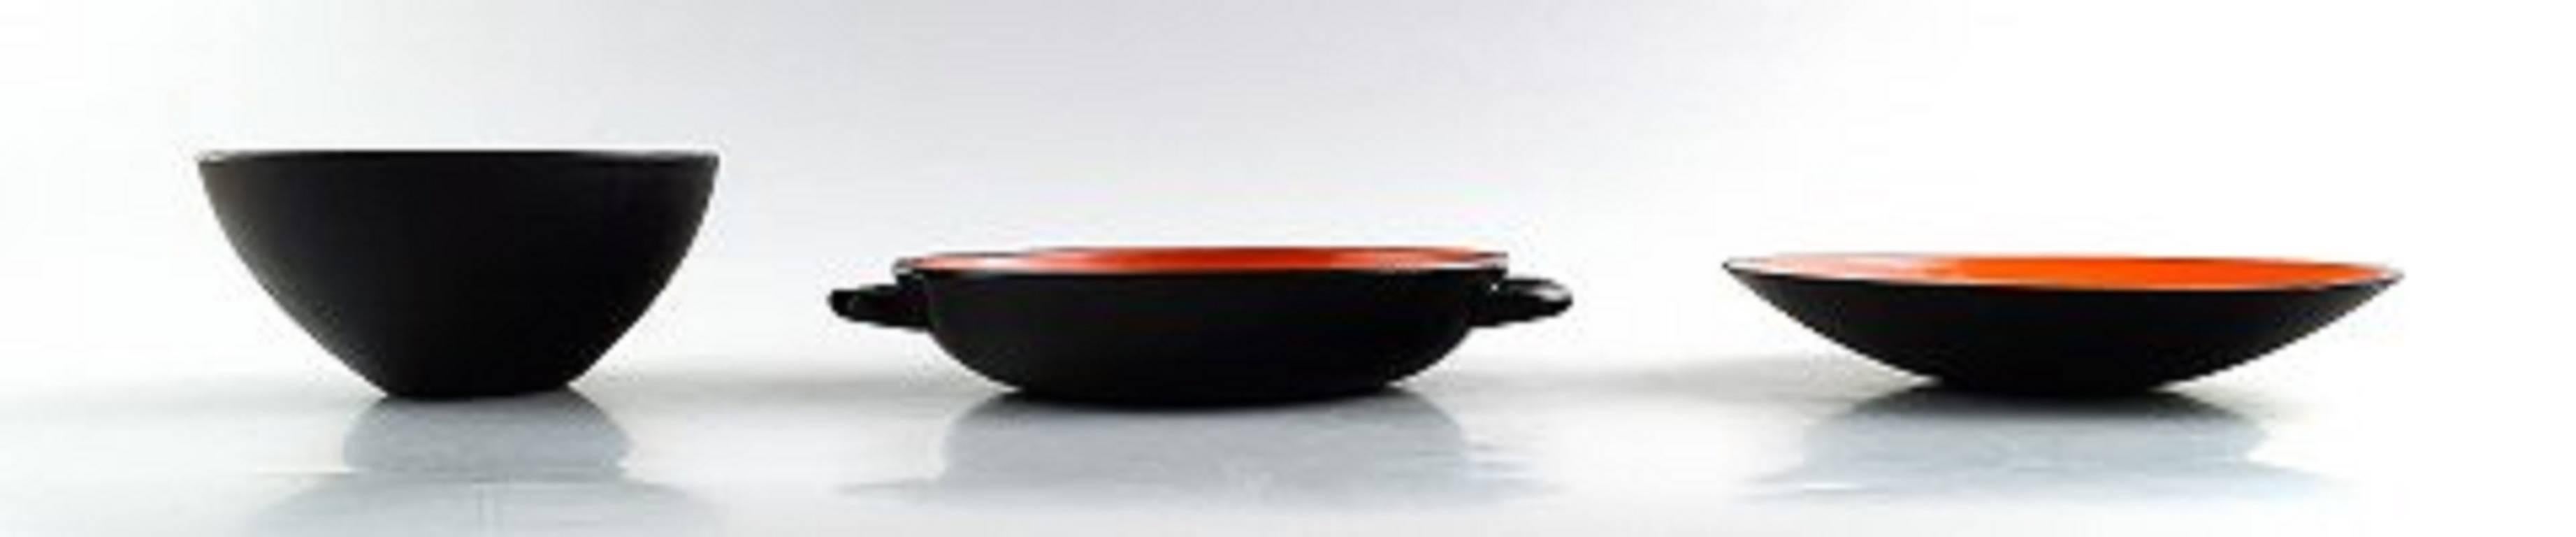 Krenit bowl and two dishes by Herbert Krenchel.

Black metal and orange enamel,

1970s, Danish design.

The bowl measures 12.5 cm. in diameter. 6.5 cm. high. 

The dishes measures 16 cm. and 18.5 cm.

In very good condition.

Hallmarked.